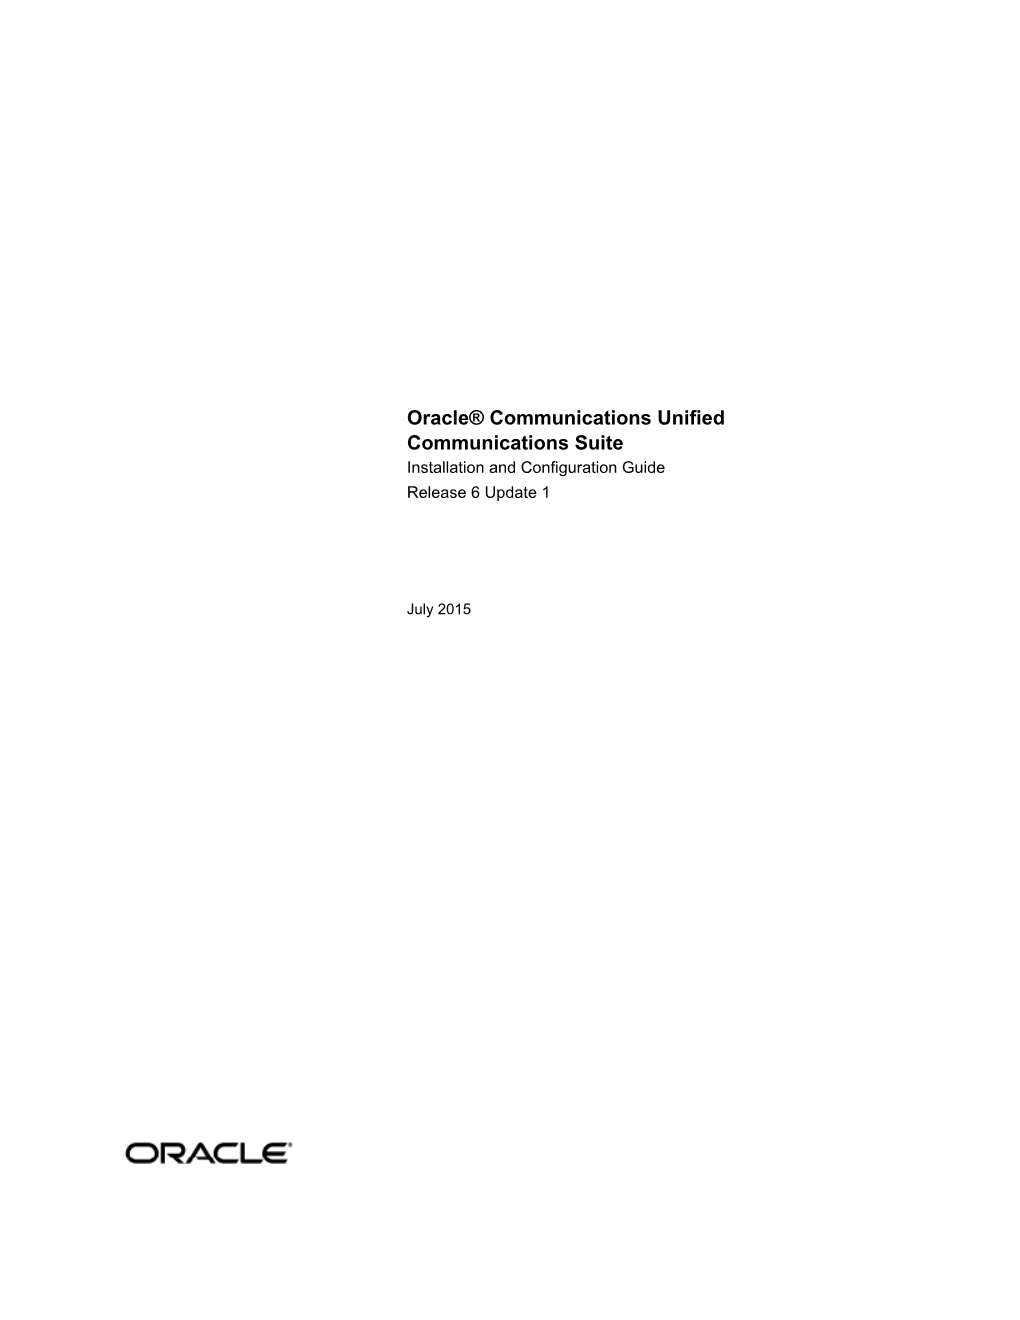 Oracle® Communications Unified Communications Suite Installation and Configuration Guide Release 6 Update 1